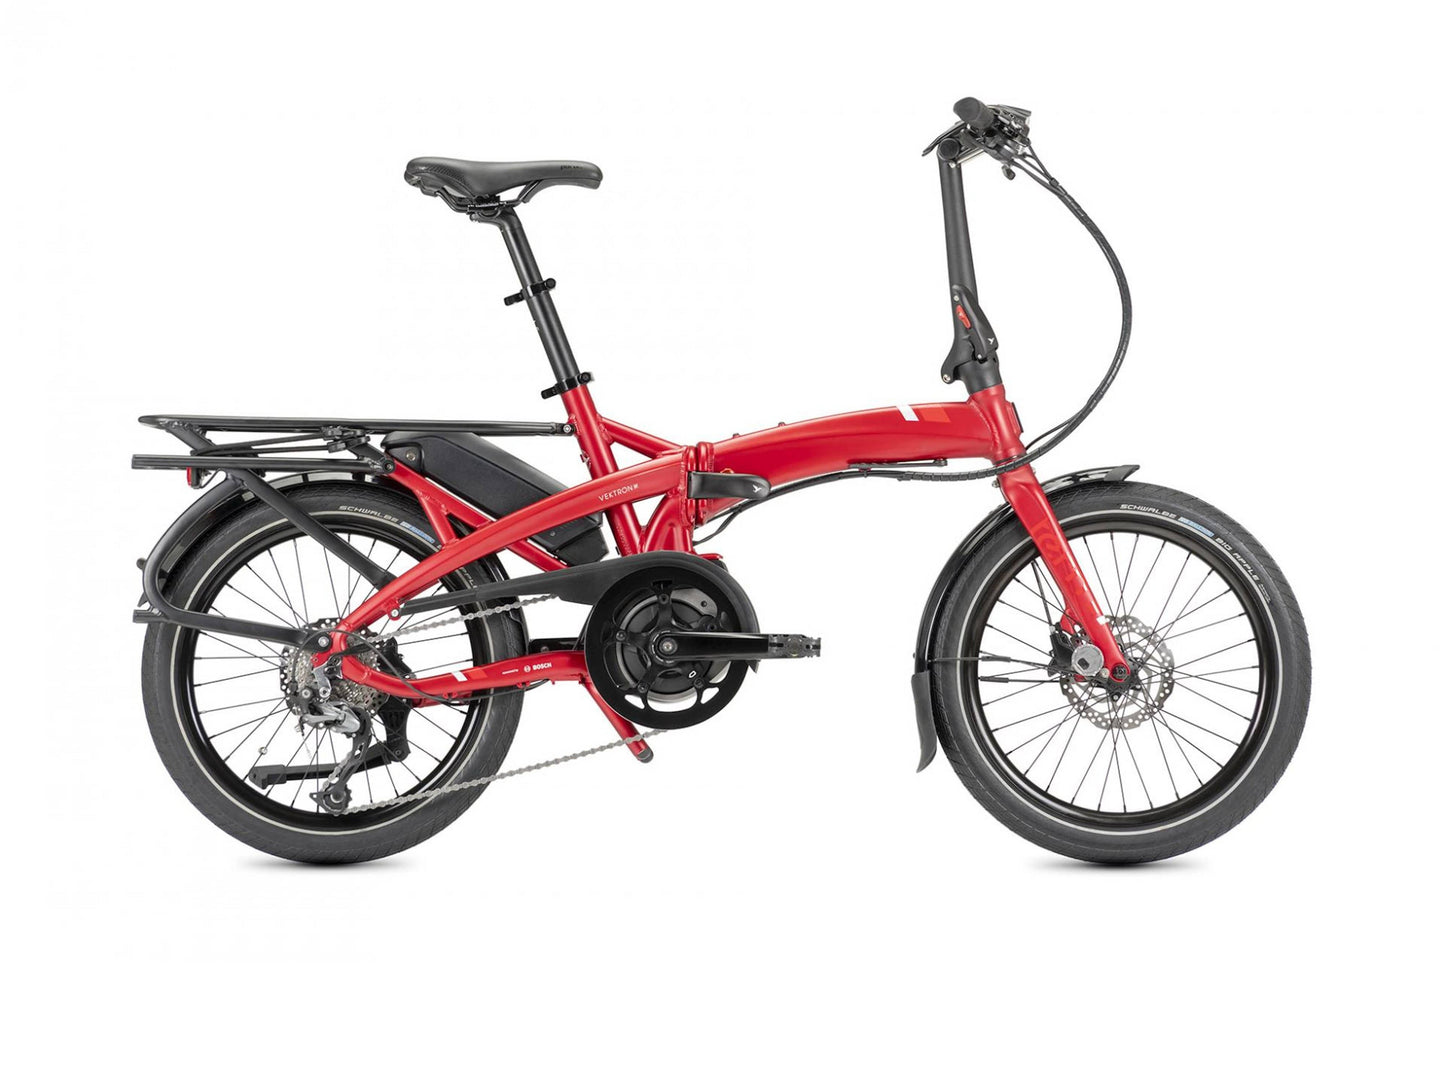 Tern Vektron Q9 electric bike satin red side view on Fly Rides